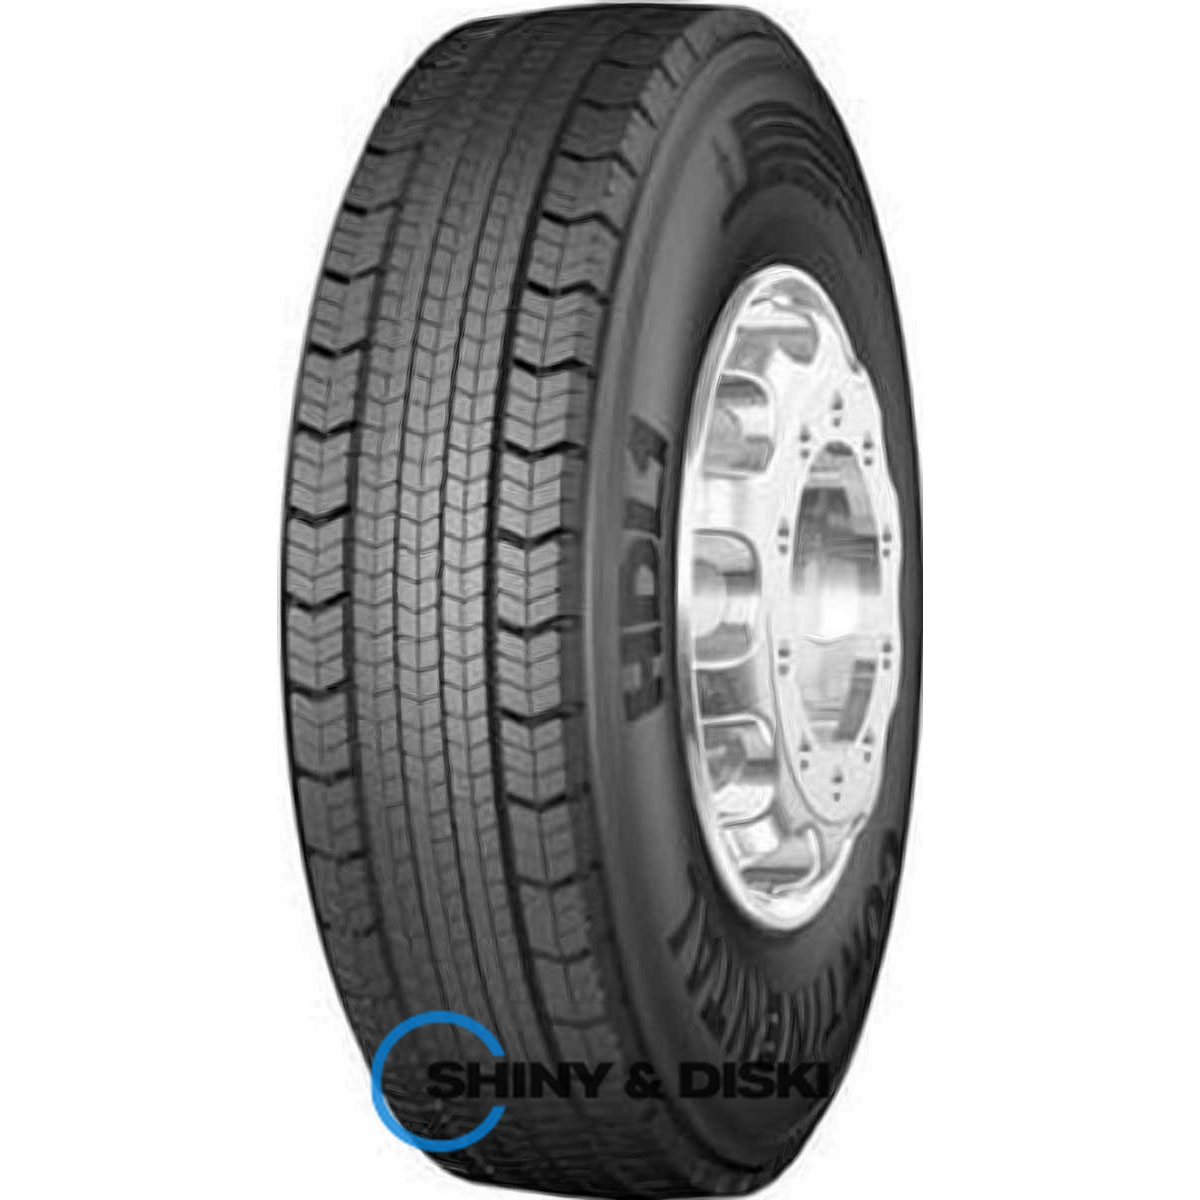 continental hdl1 eco-plus 295/80 r22.5 152/148m